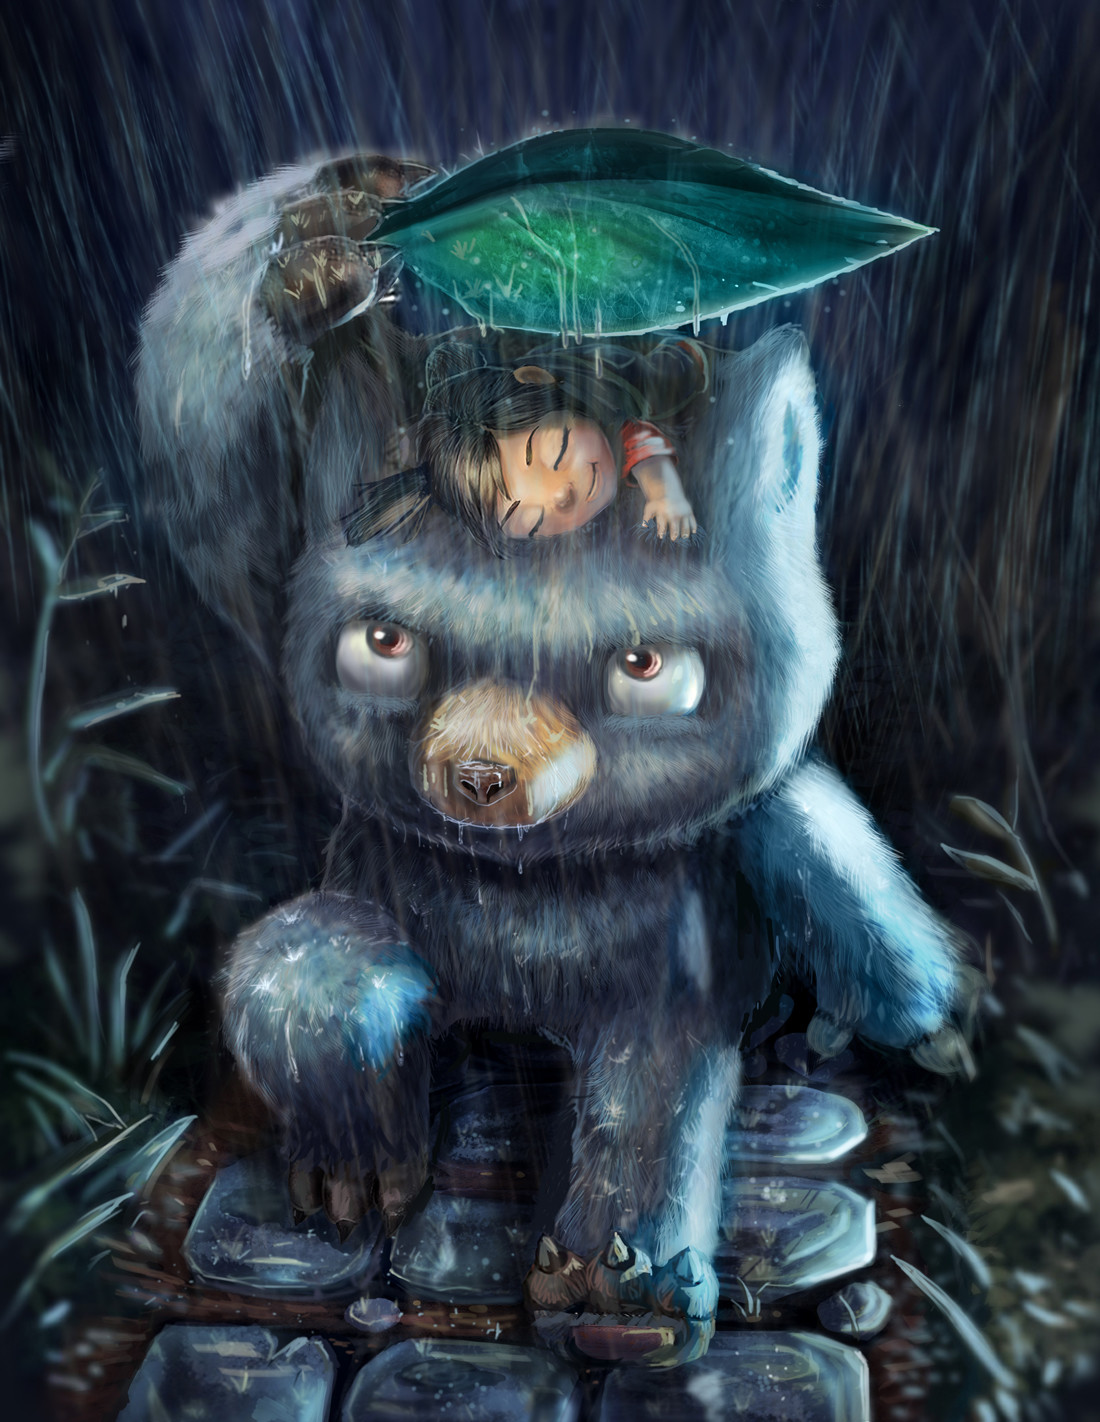 Monster and Girl in the Rain